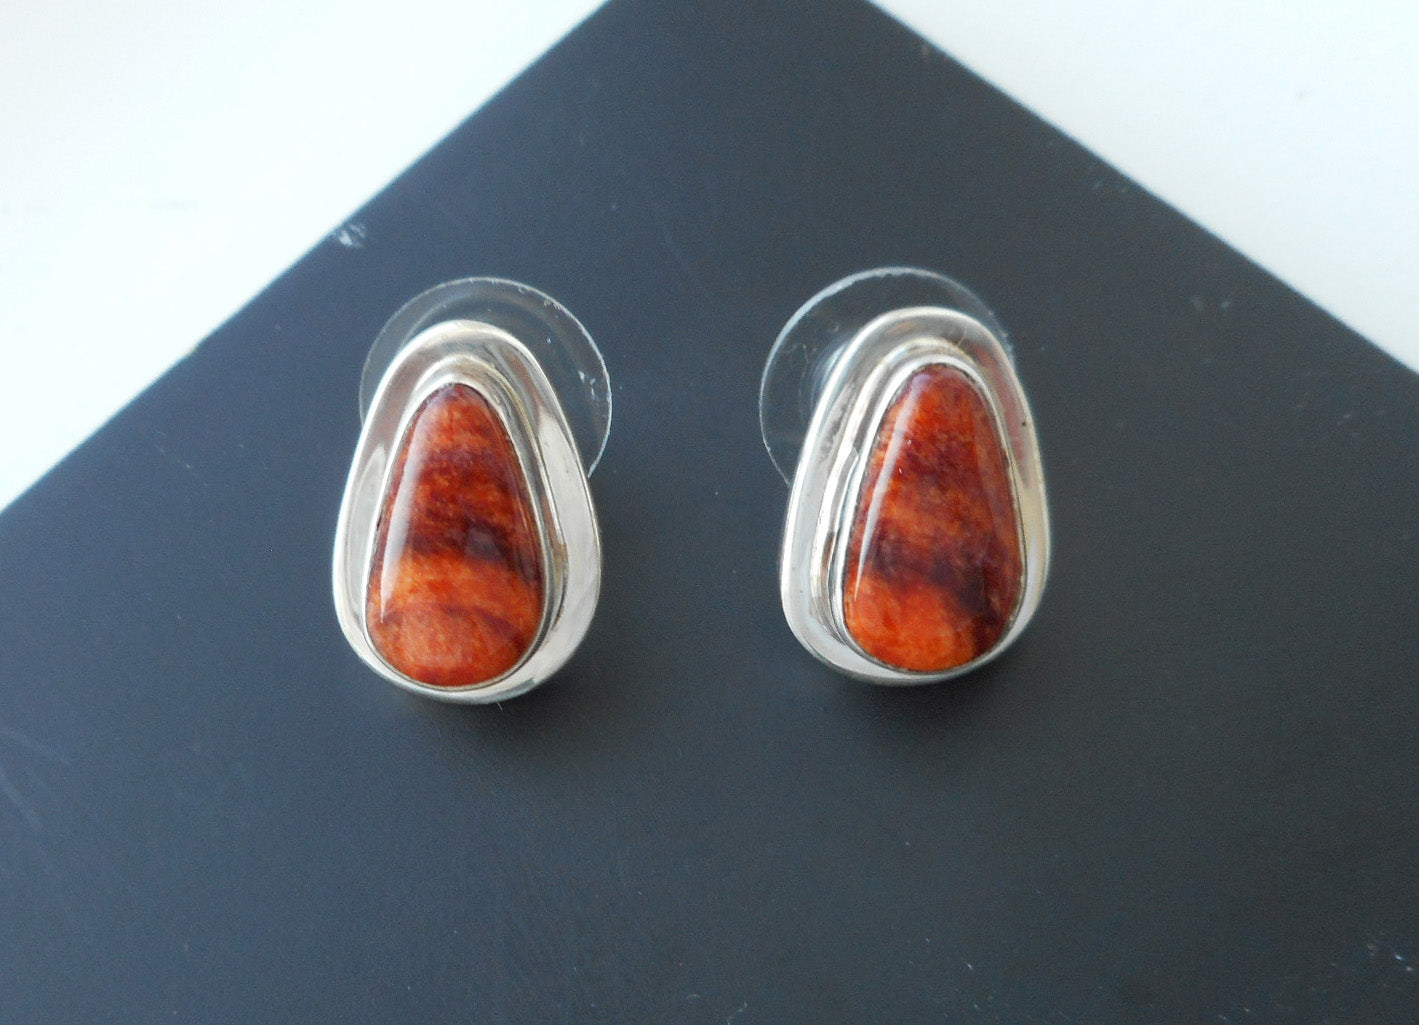 Stud Earrings. Beautiful Orange Spiny Oyster stones reminiscent of a fiery sunset.  Bright and dark orange has subtle bands of black.  The stones are a soft teardrop shape.  Set in Sterling Silver bezel style with a small amount of backplate showing on the edge. Overall size is approximate 5/8 inch.  